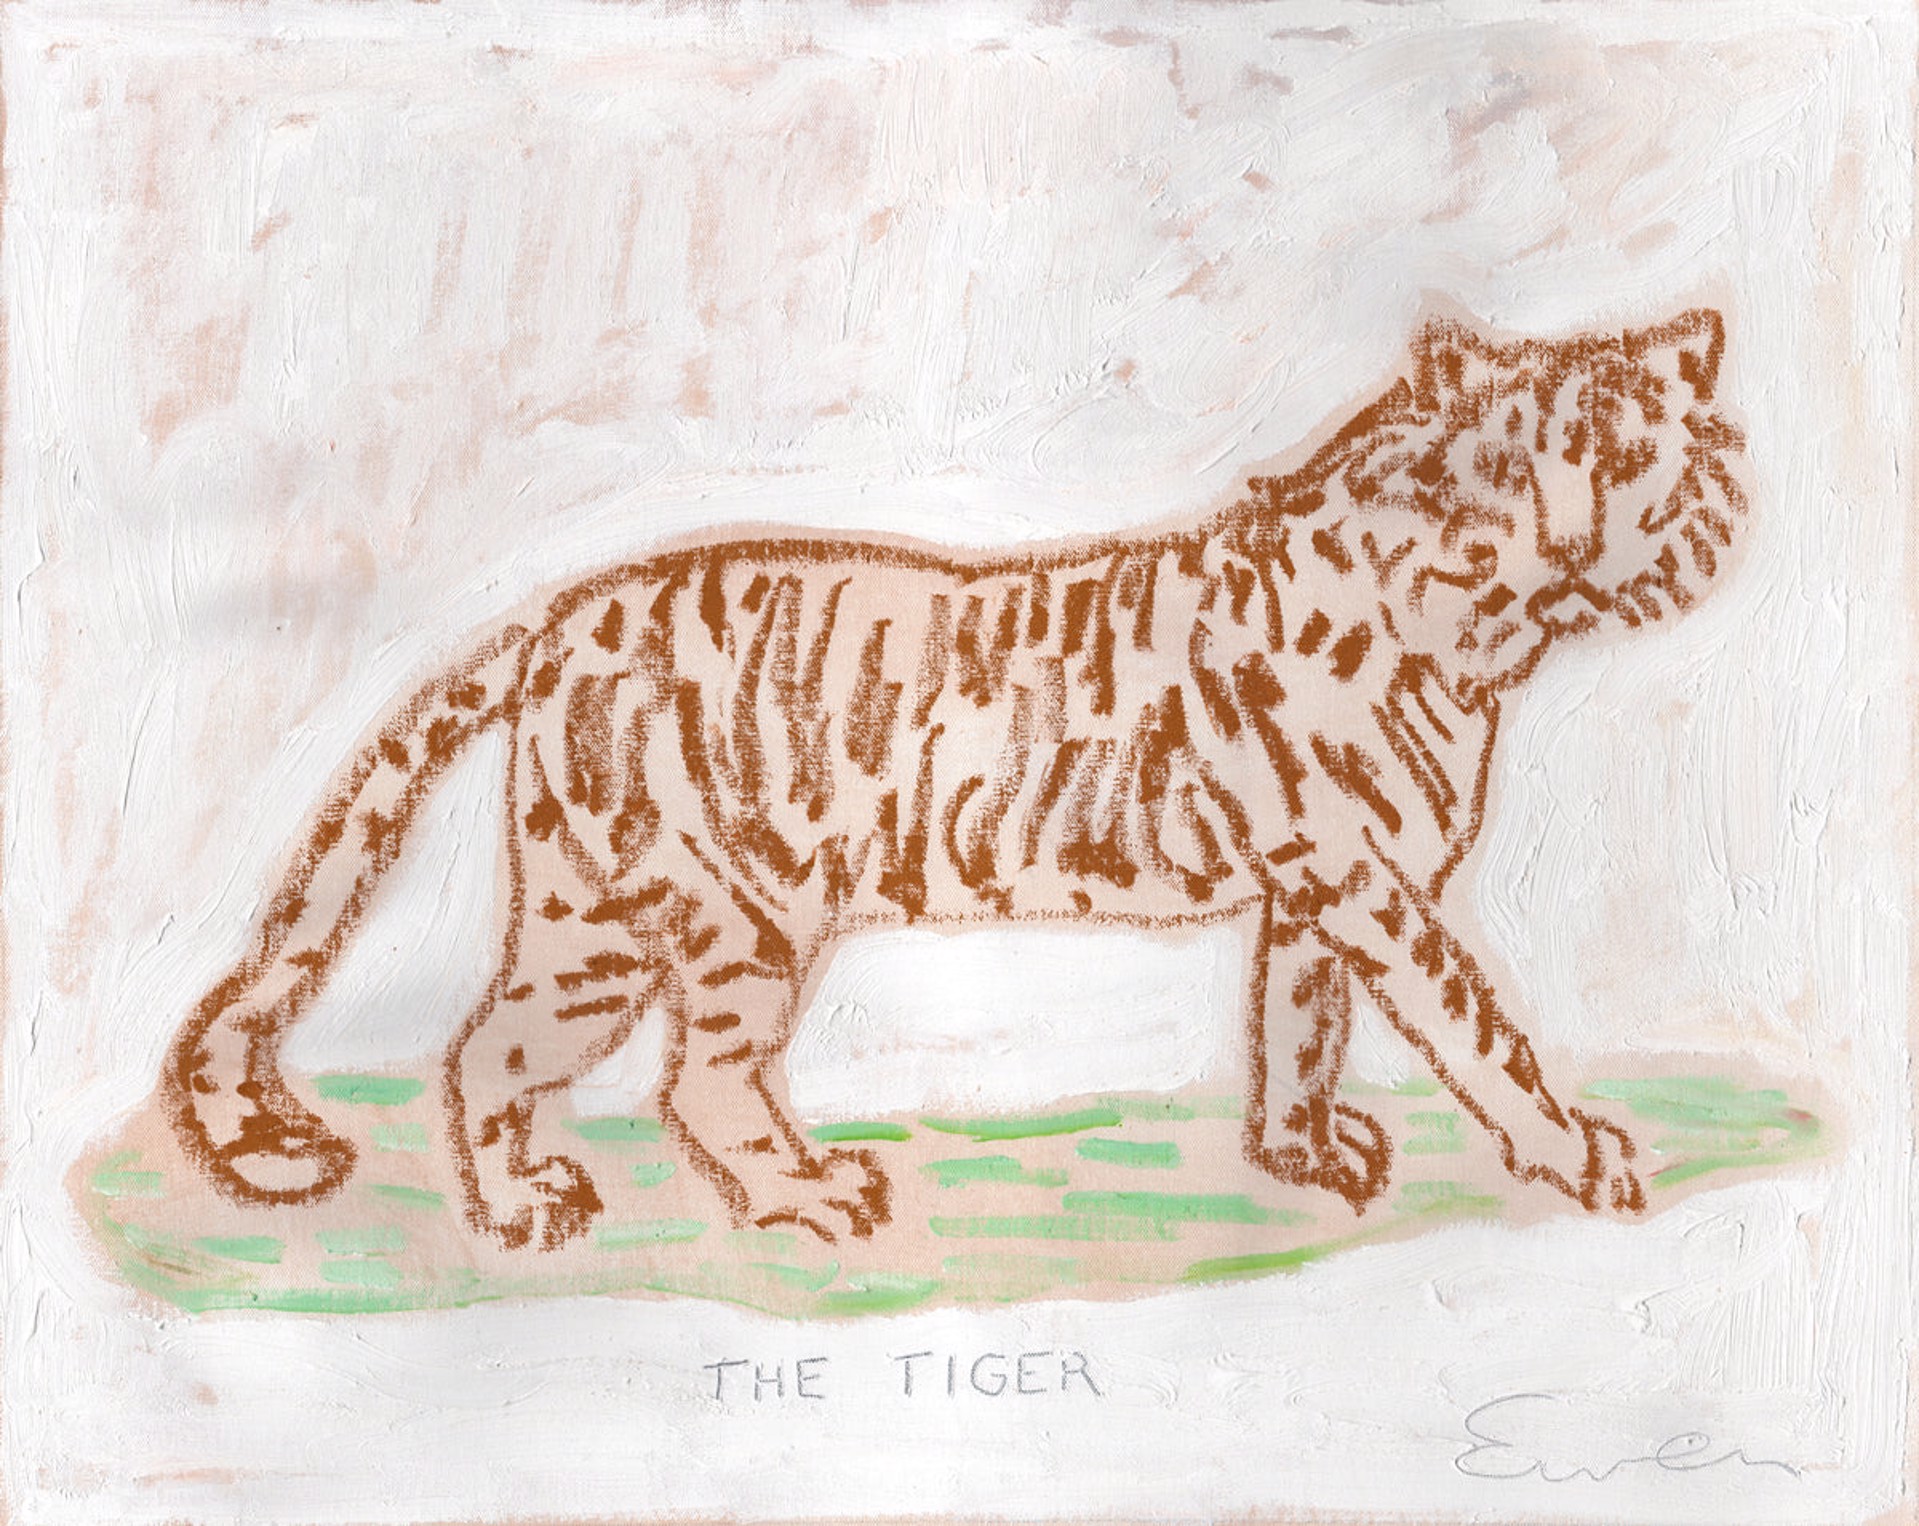 The Tiger (No. 1) by Anne-Louise Ewen